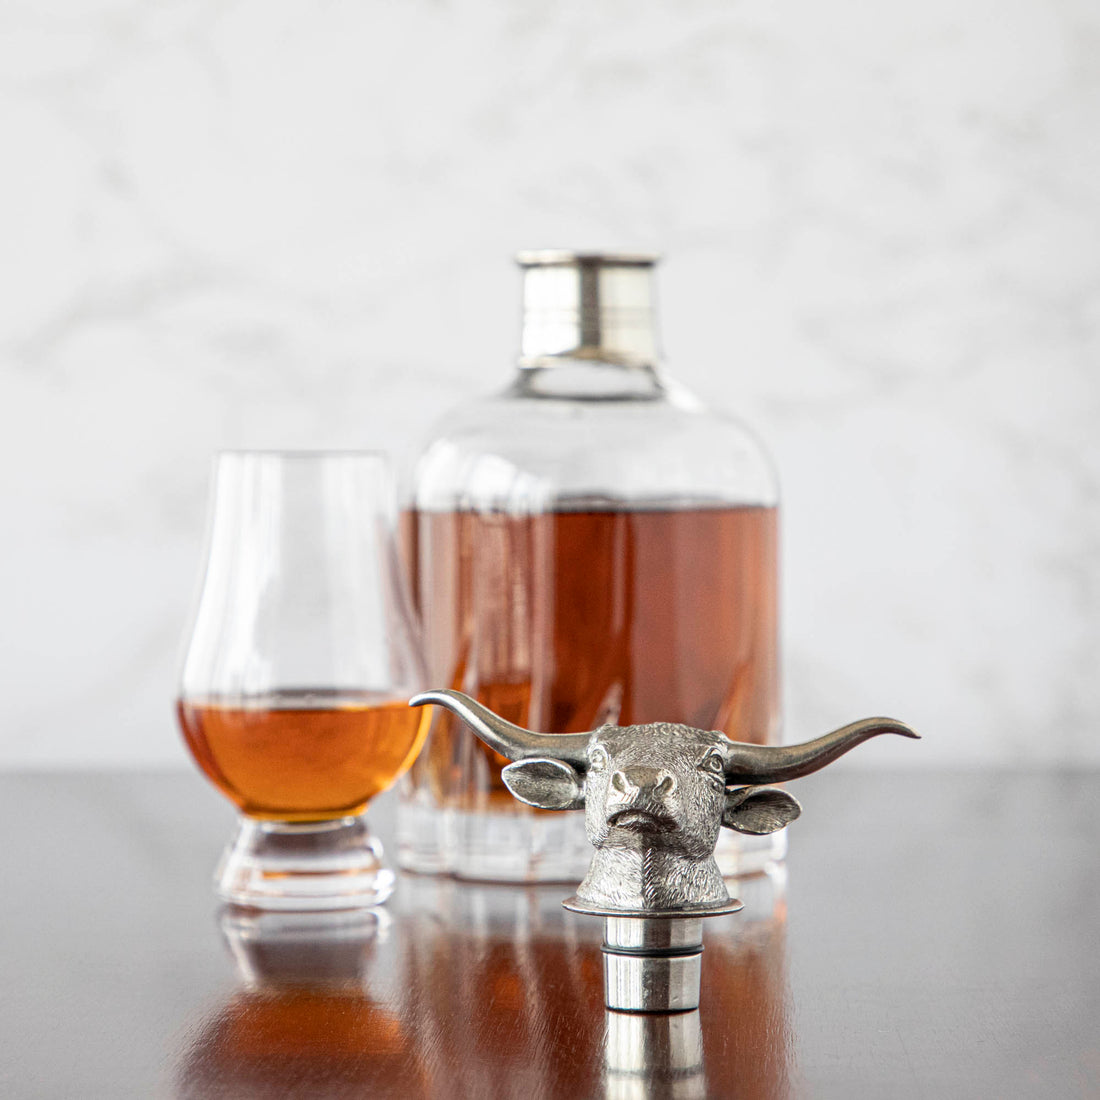 A Menagerie crystal Longhorn whisky decanter with a metallic bull head stopper accompanied by two glasses on a wooden surface, against a marble background.